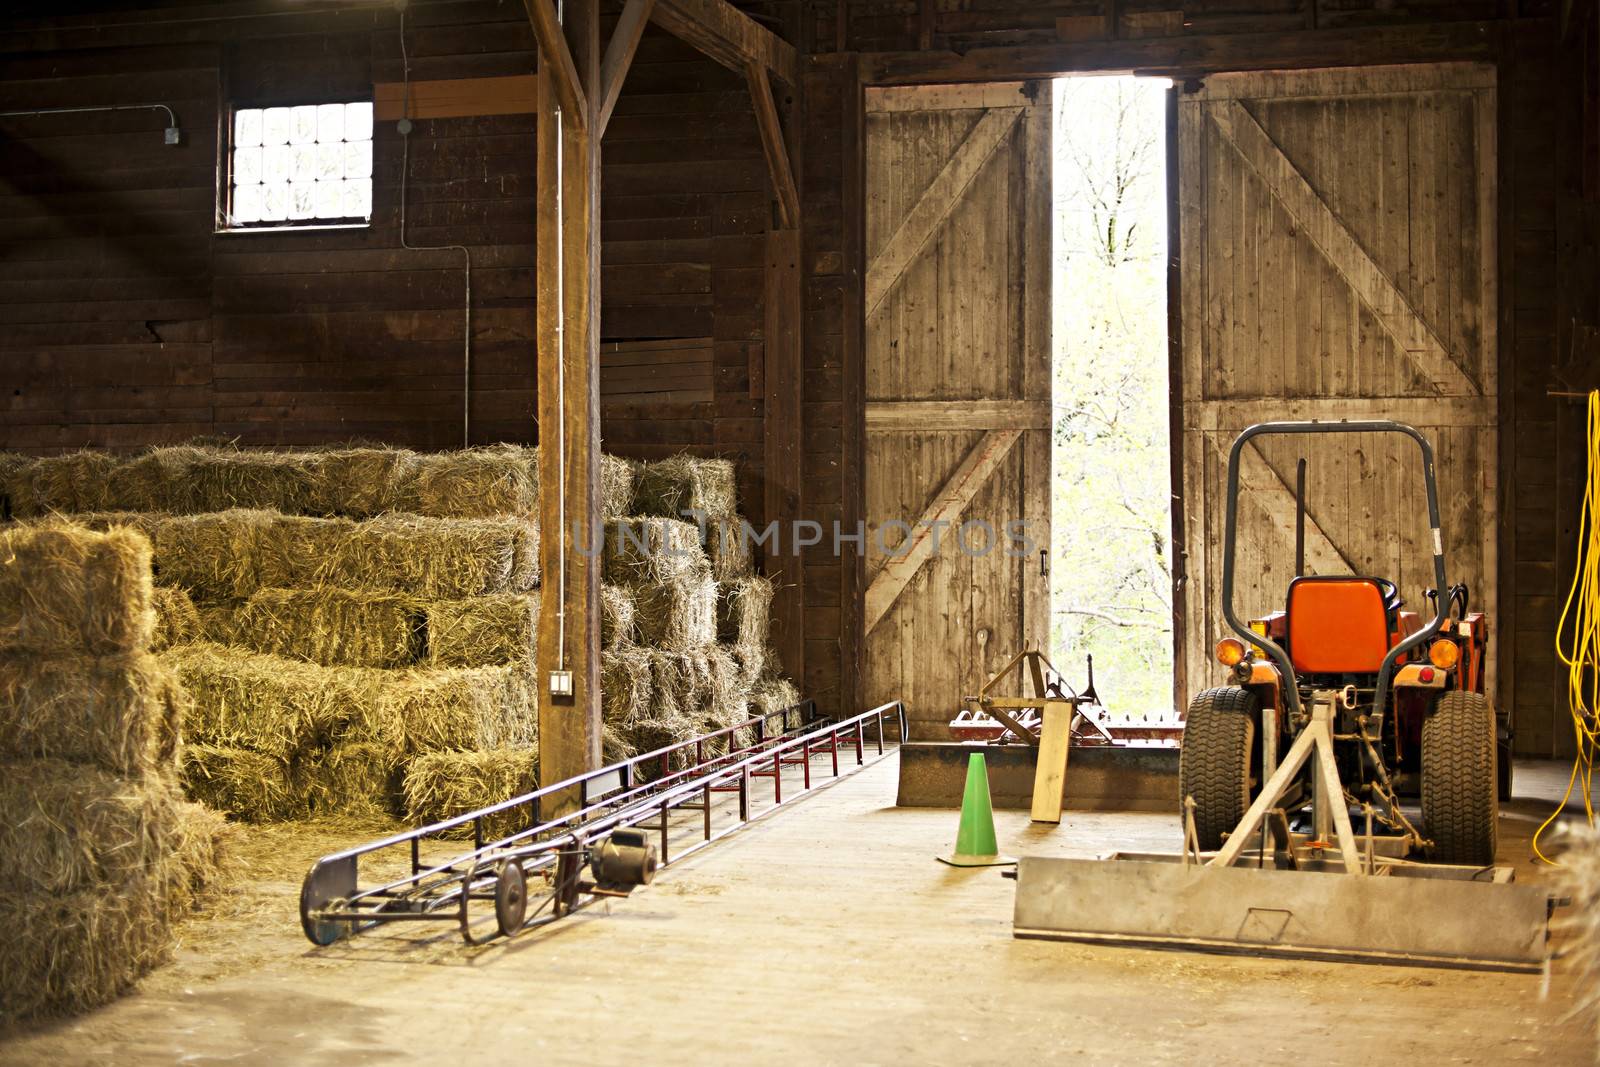 Barn interior with hay bales and farm equipment by elenathewise